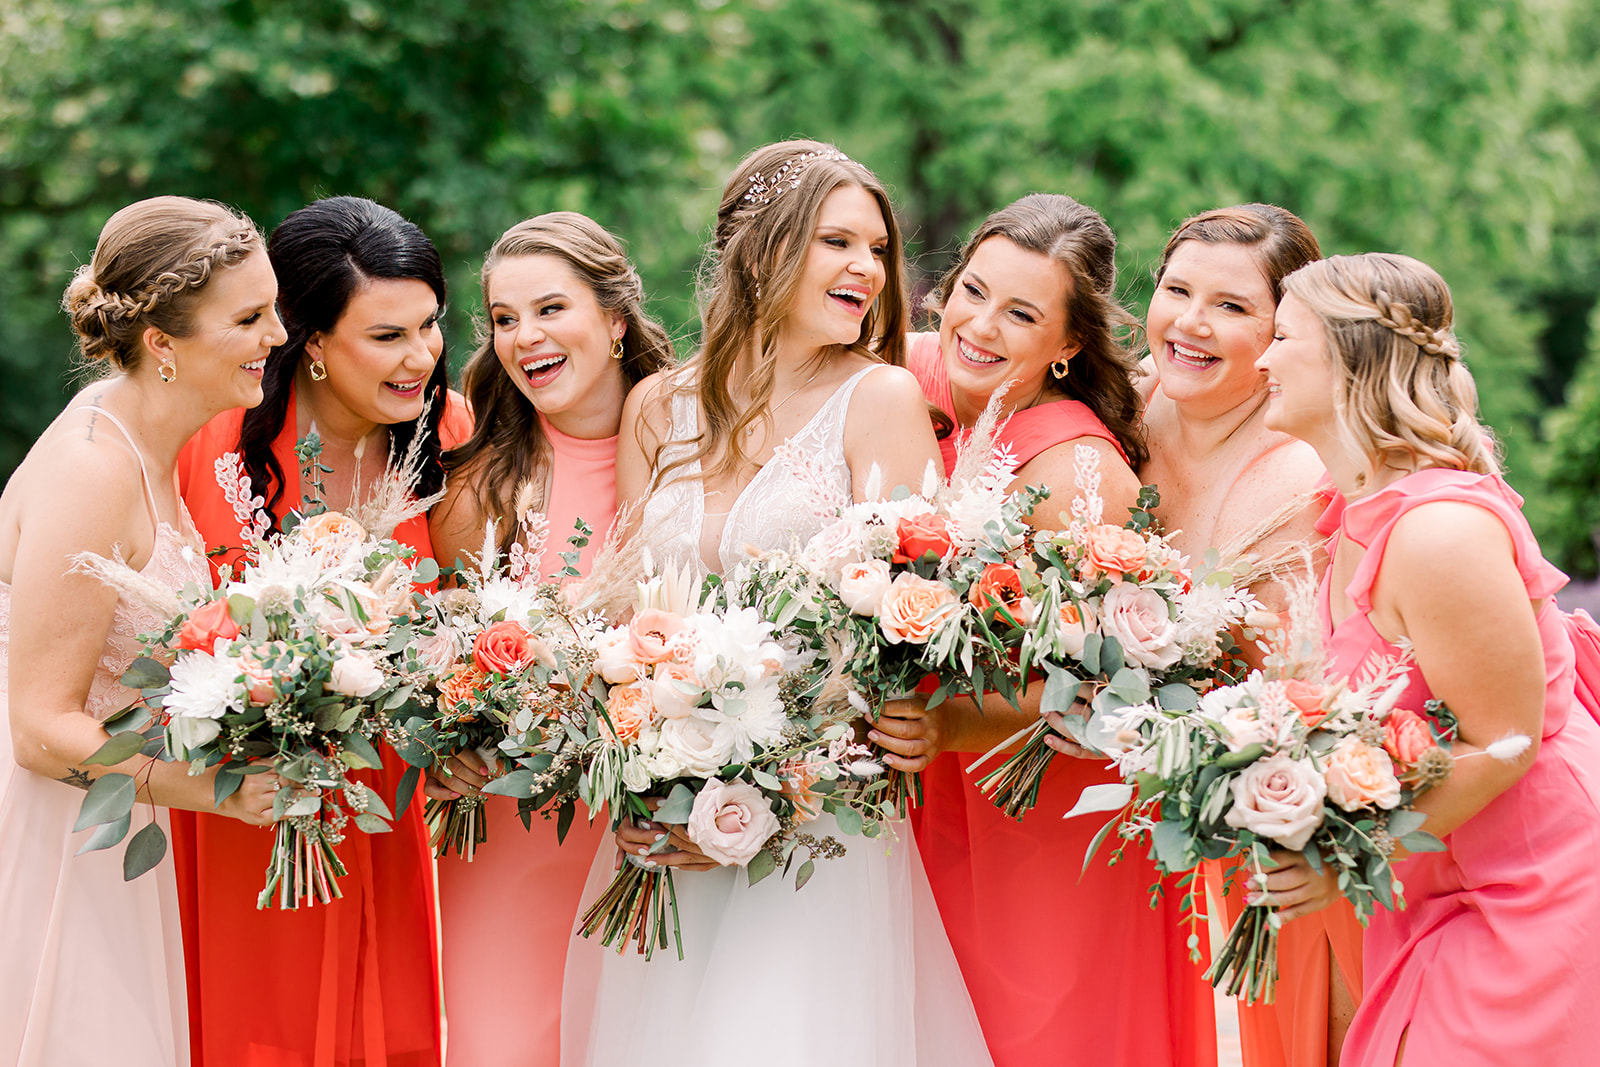 Laughing bride with bridesmaids in colorful dresses with wedding bouquets